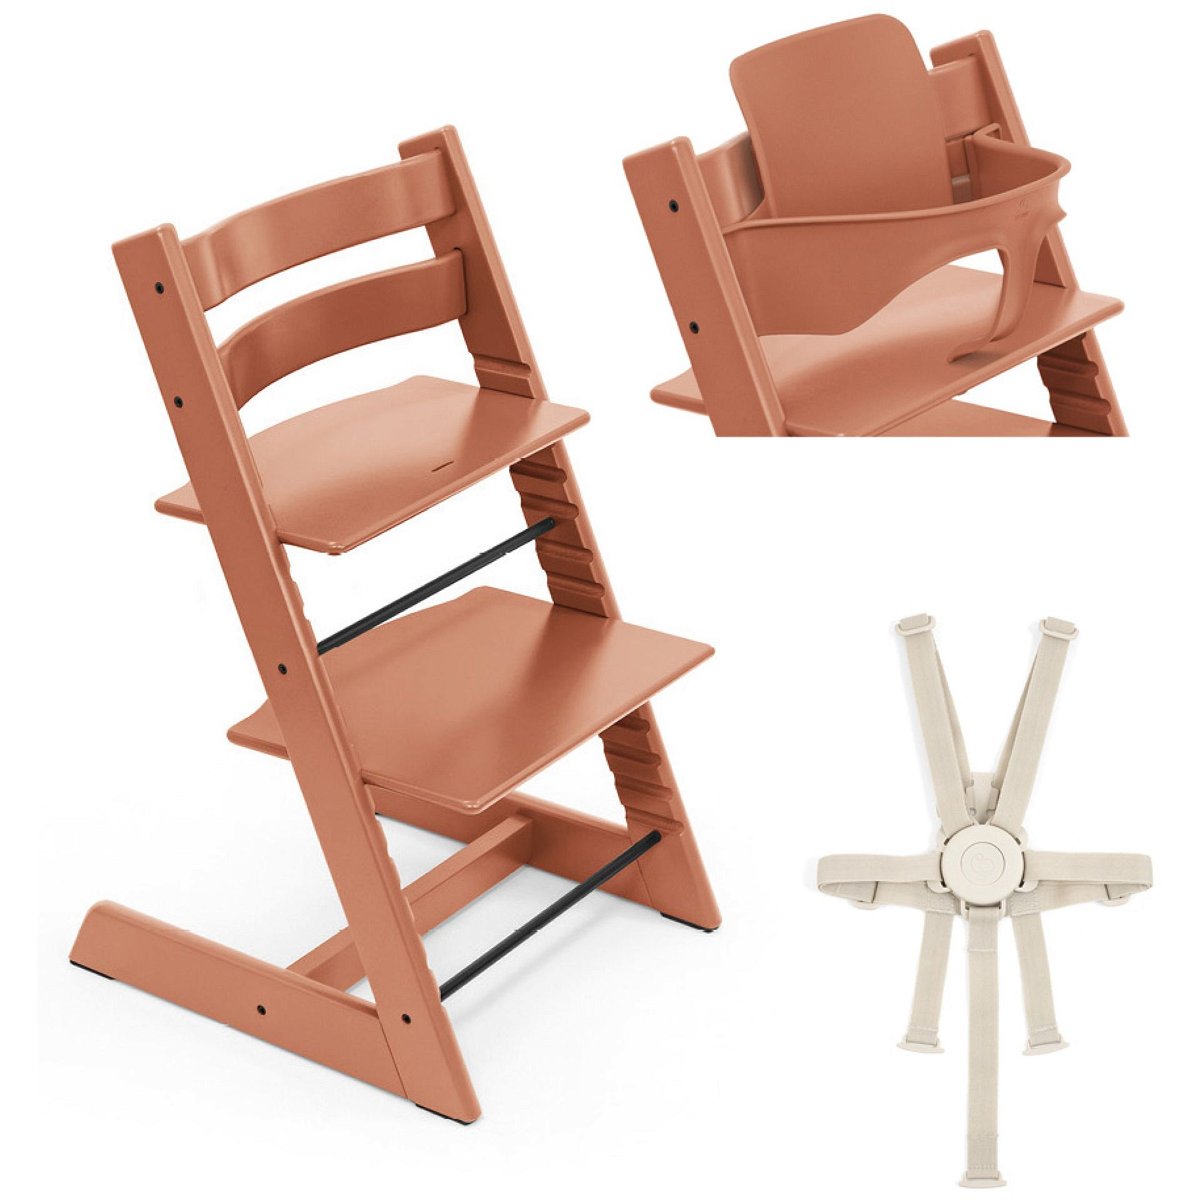 STOKKE Tripp Trapp high chair with baby set and harness - perfect 